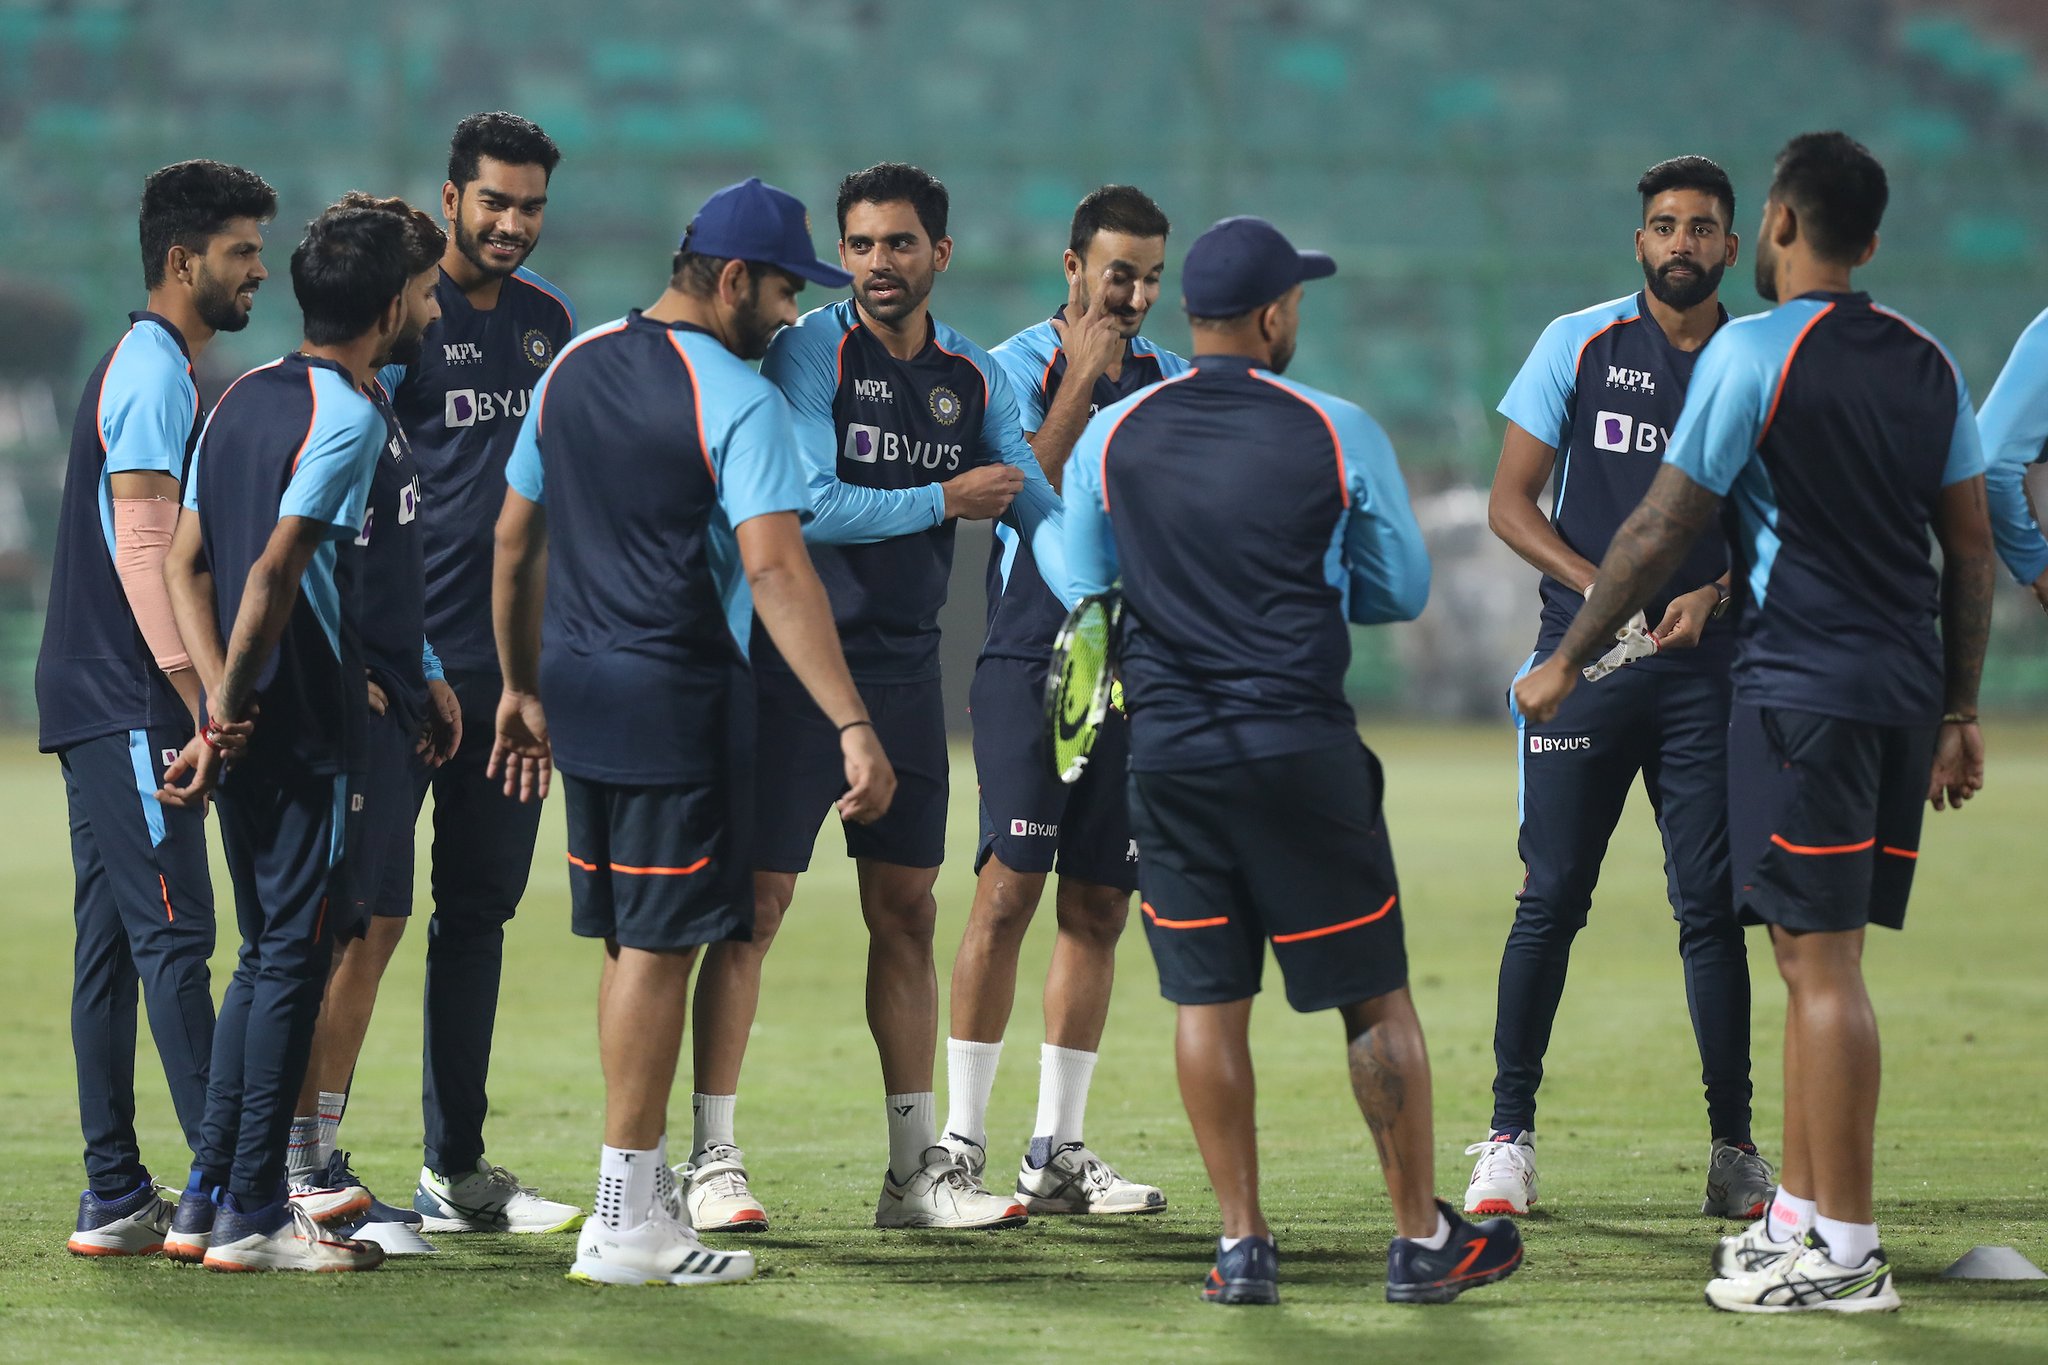 IND vs NZ | ‘India to win 2-1’ – Harbhajan Singh predicts India-New Zealand T20I series result